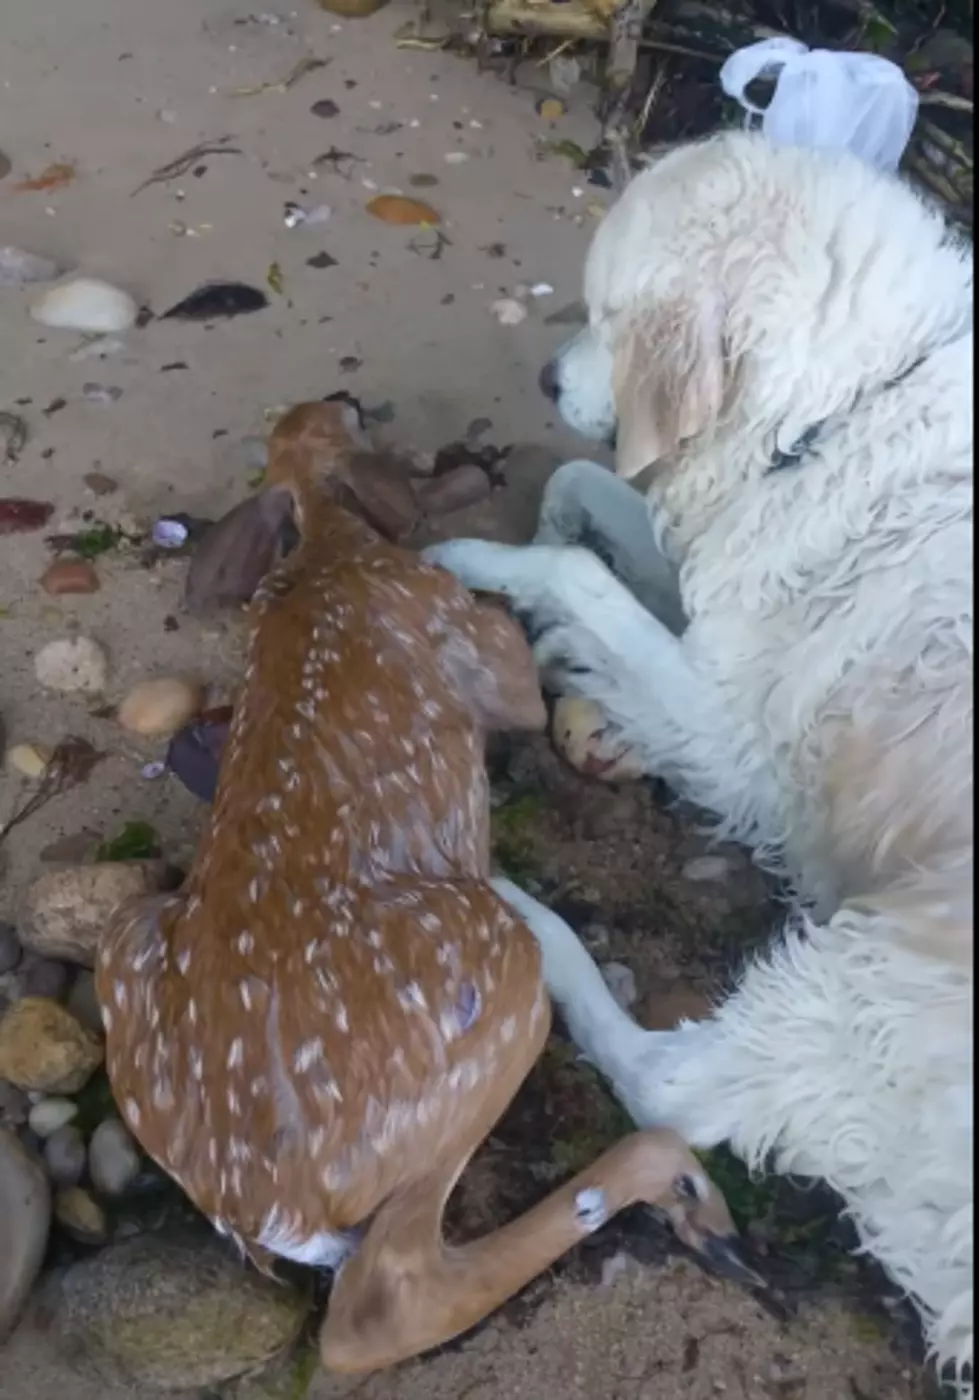 Amazing Video Shows Good Dog Rescuing Deer From Drowning